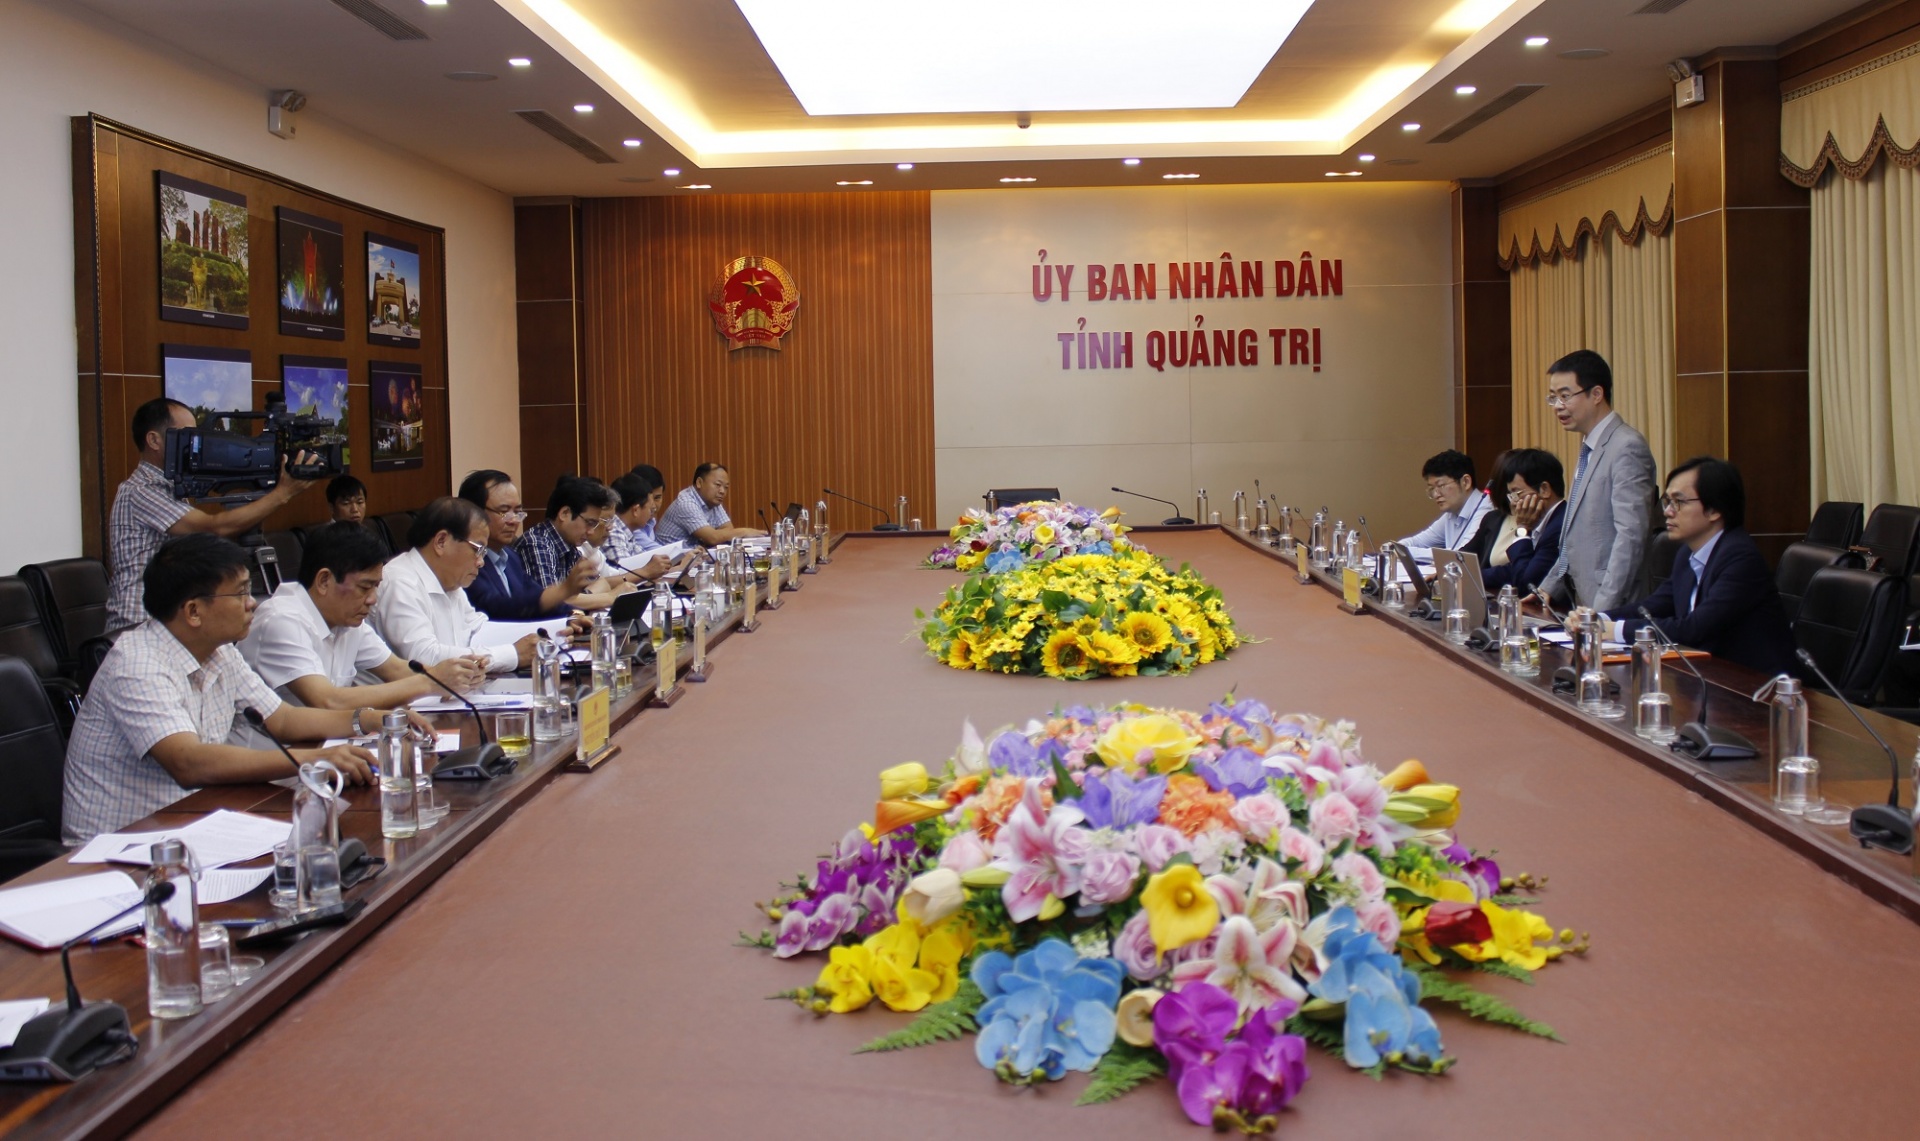 Chinese corporation proposes $2.4 billion power project in Quang Tri